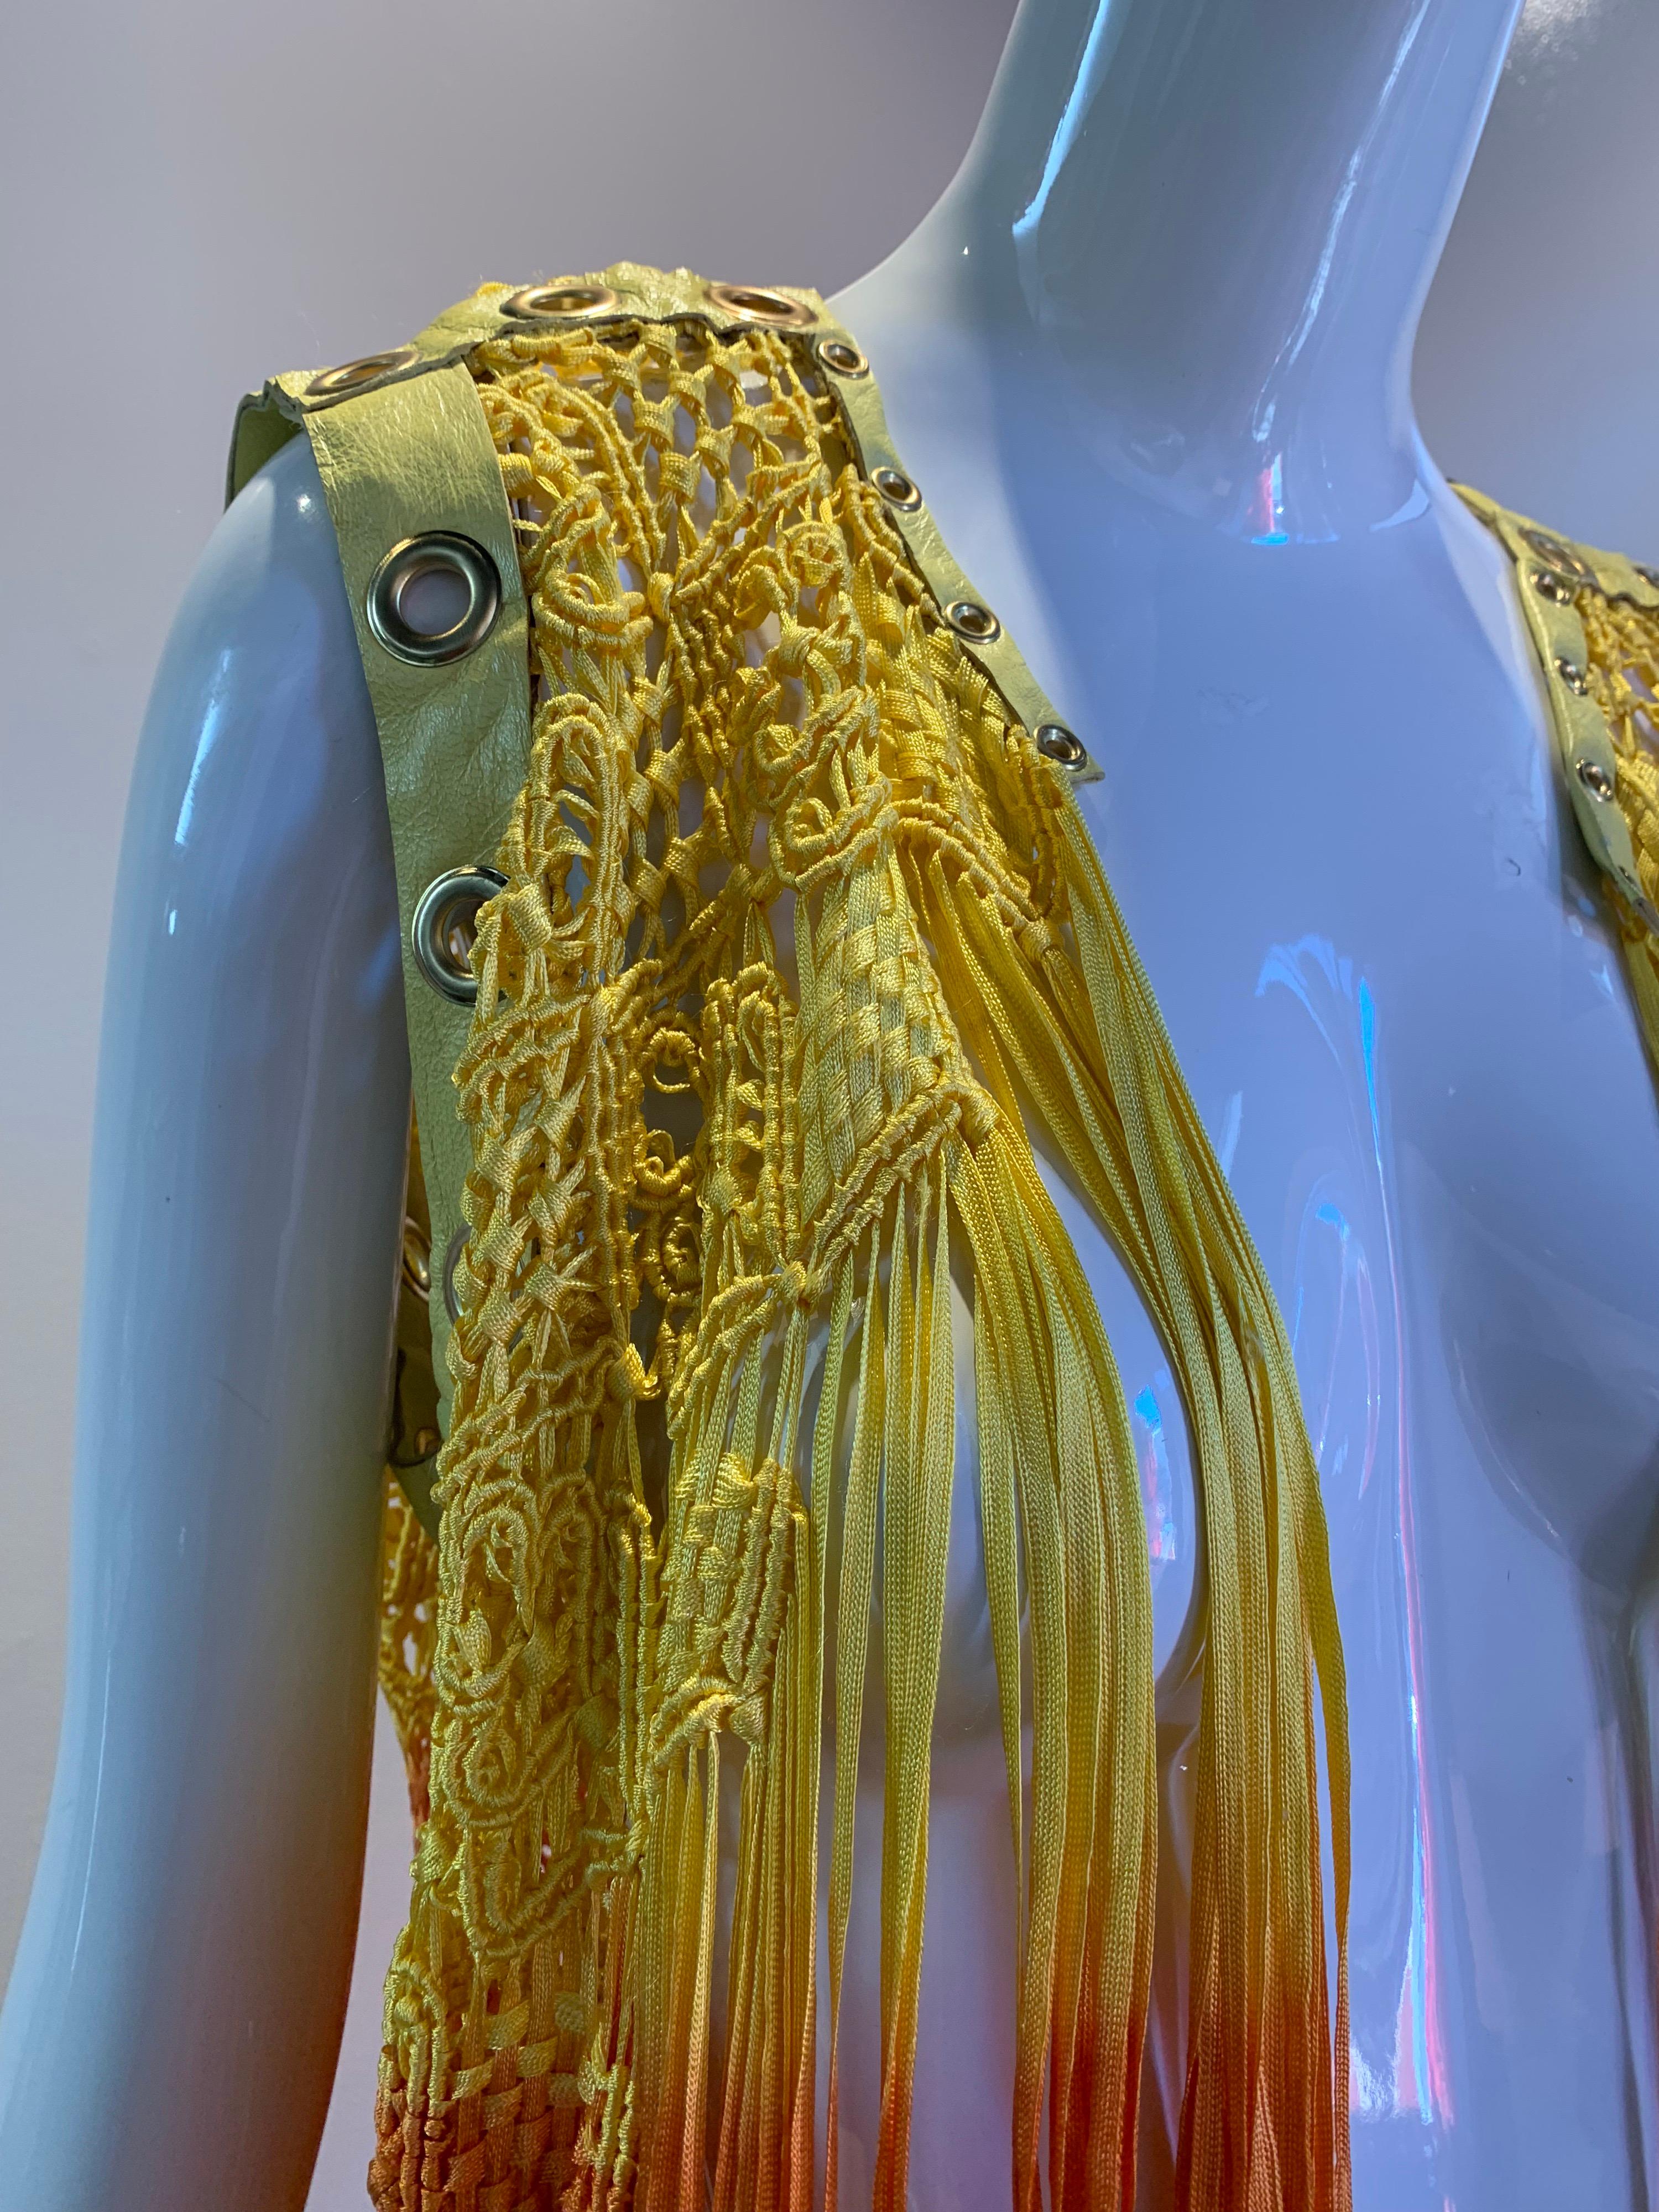 A beautiful, vibrant Torso Creations ombre-dyed rayon ribbon macrame fringe vest with yellow leather trim punctuated with eyelets in colors ranging from canary yellow to a bright reddish-orange.  Can tie at front. 